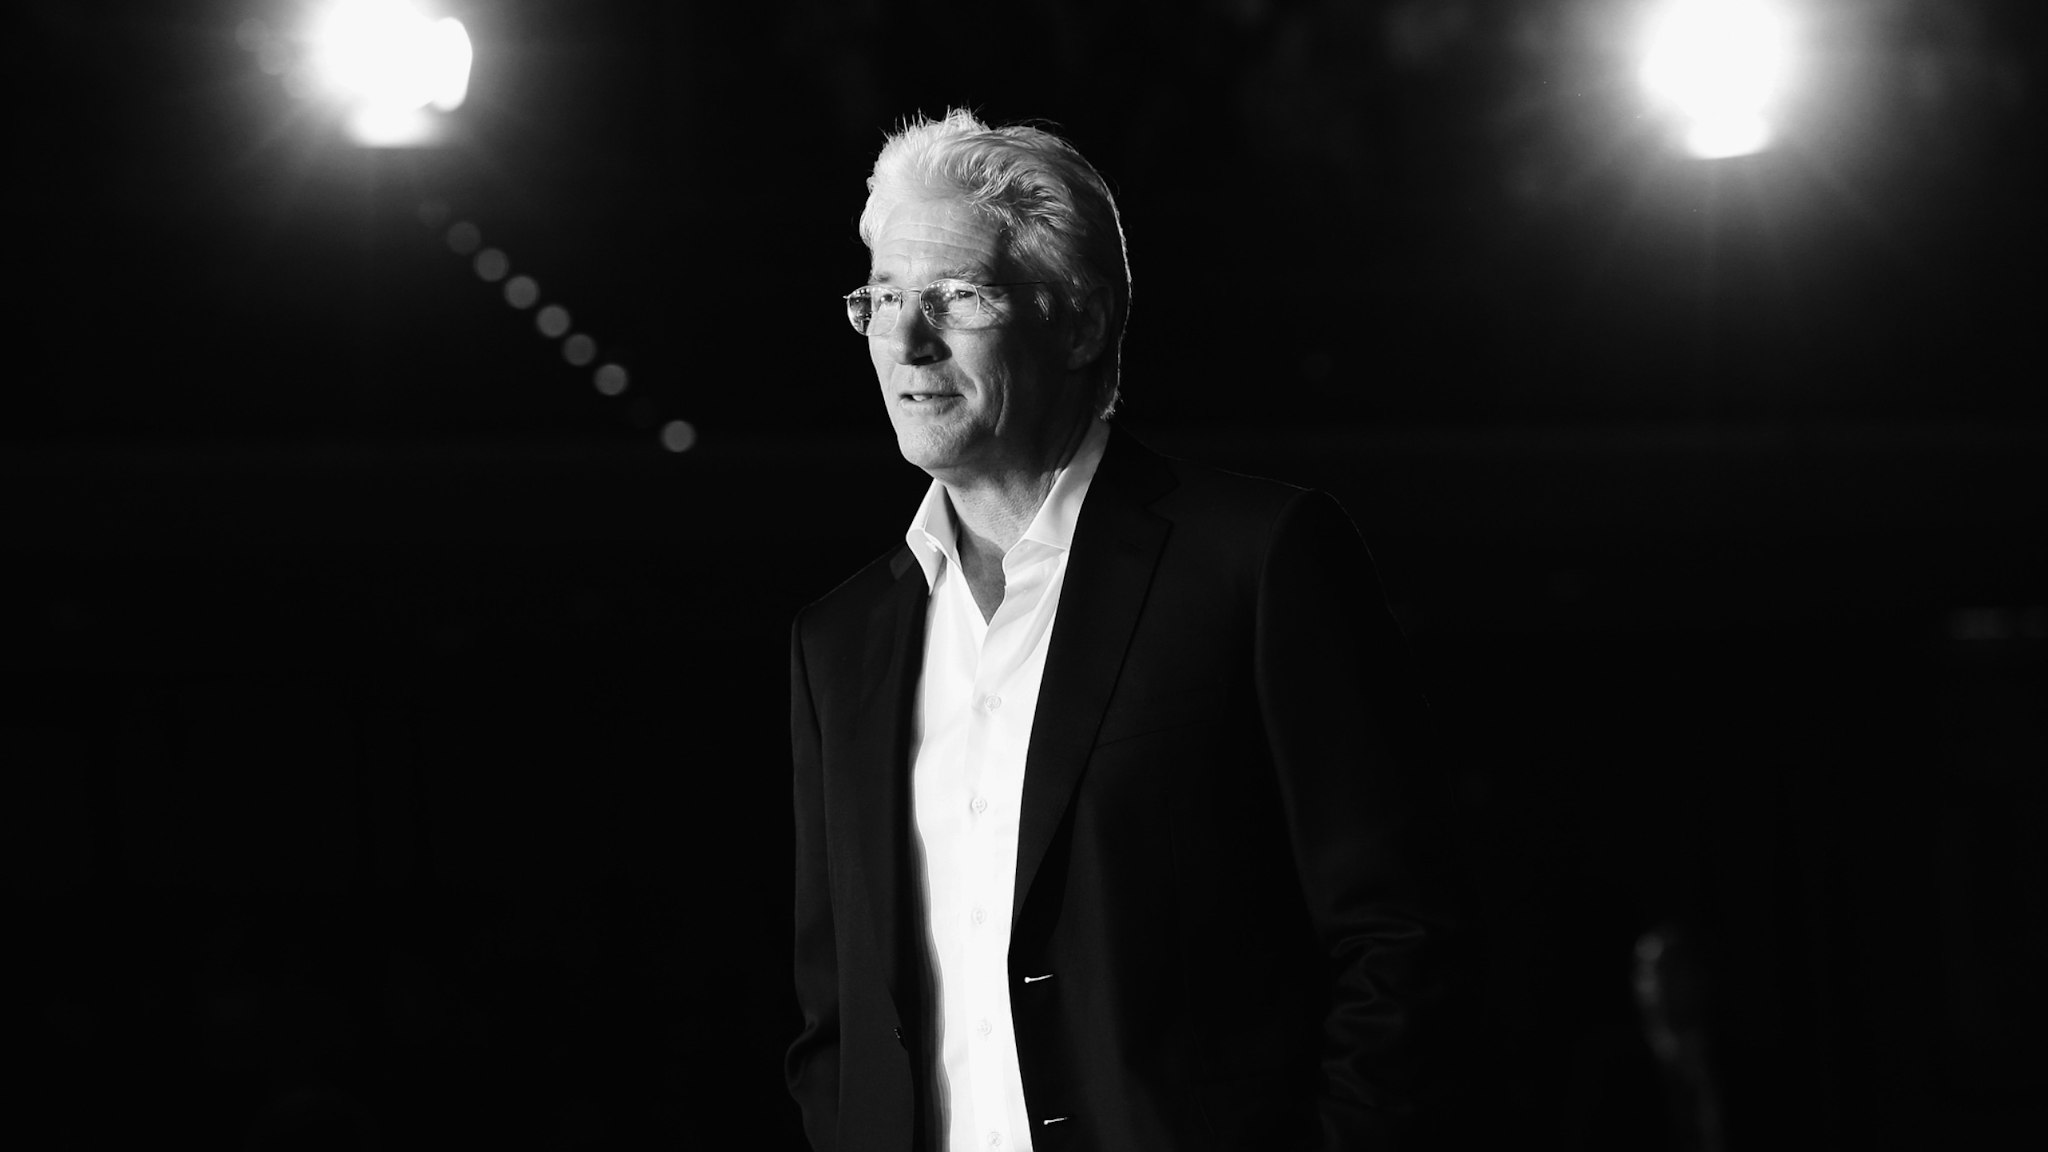 Image has been converted to black and white.) Richard Gere attends the 'Time Out of Mind' Red Carpet during the 9th Rome Film Festival on October 19, 2014 in Rome, Italy.